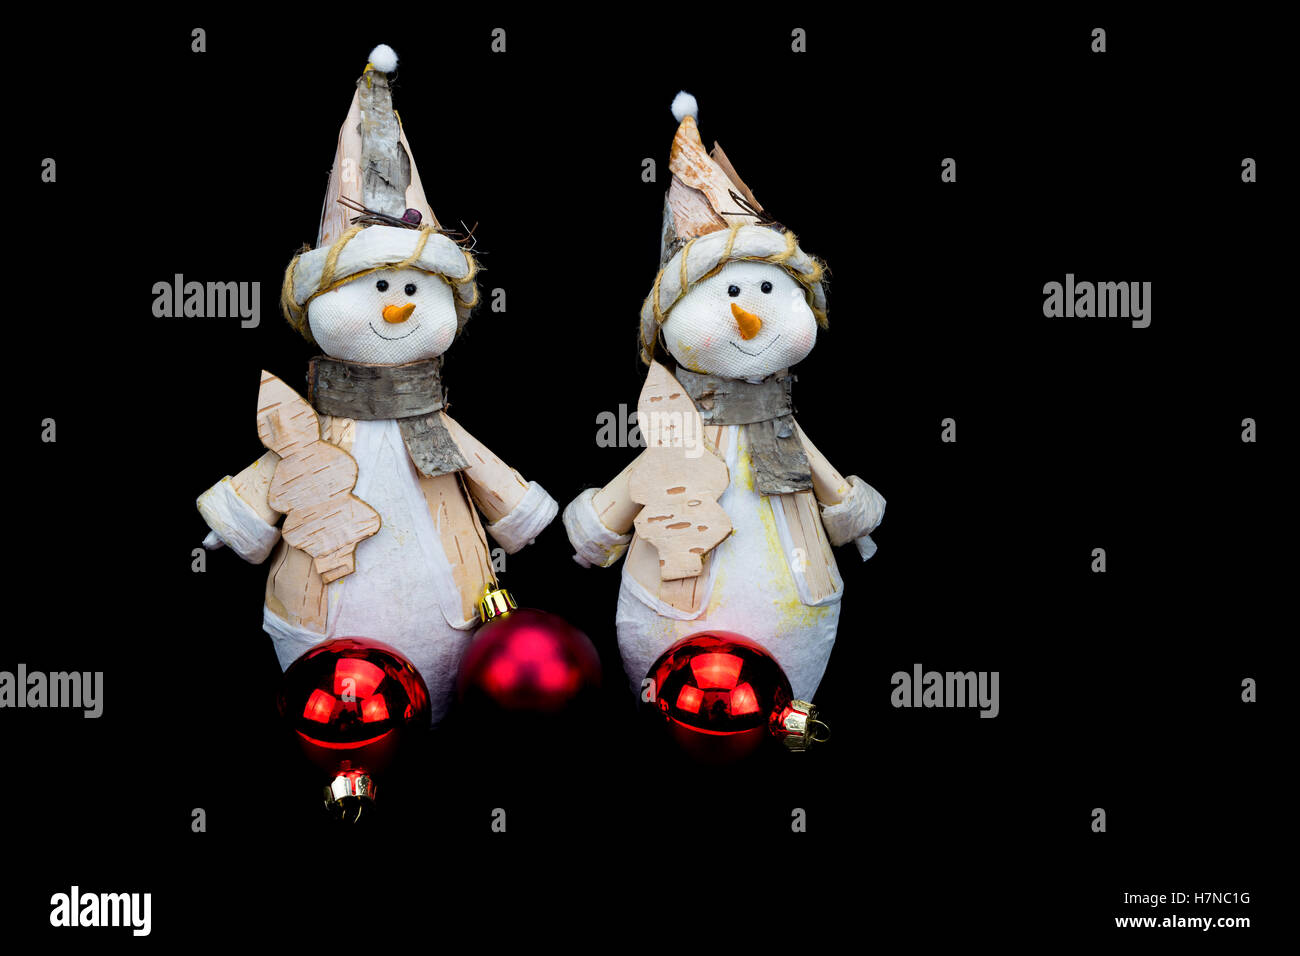 Two snowmen figurines with red baubles on black Stock Photo